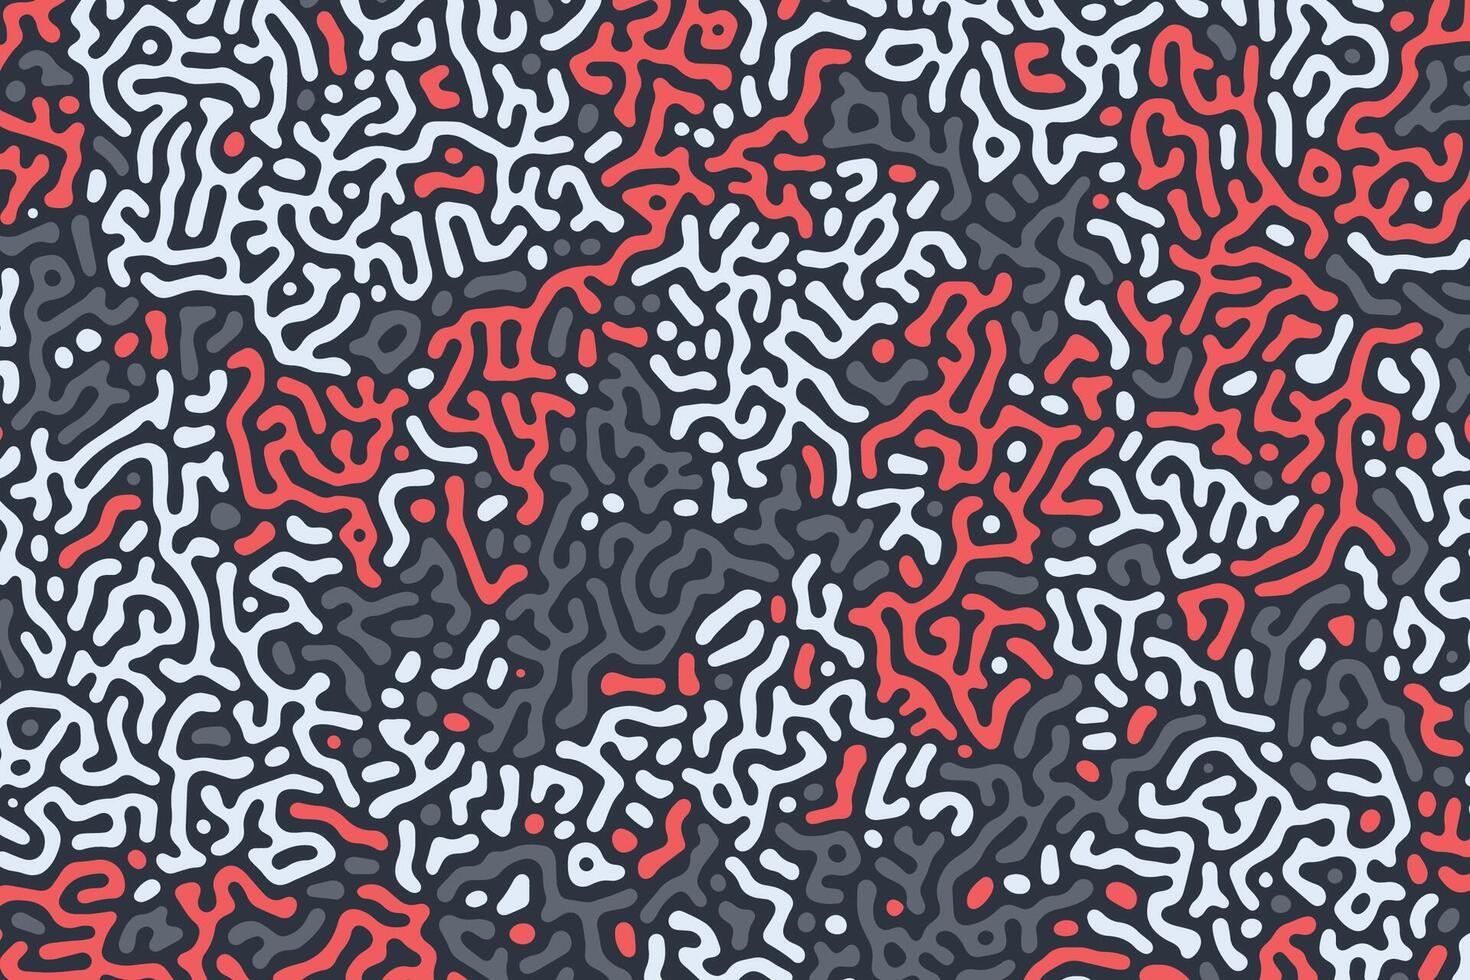 Modern and random assortment of rounded maze-like structures, in a trendy Memphis-style vector illustration with a retro flair, creating an irregular and organic pattern